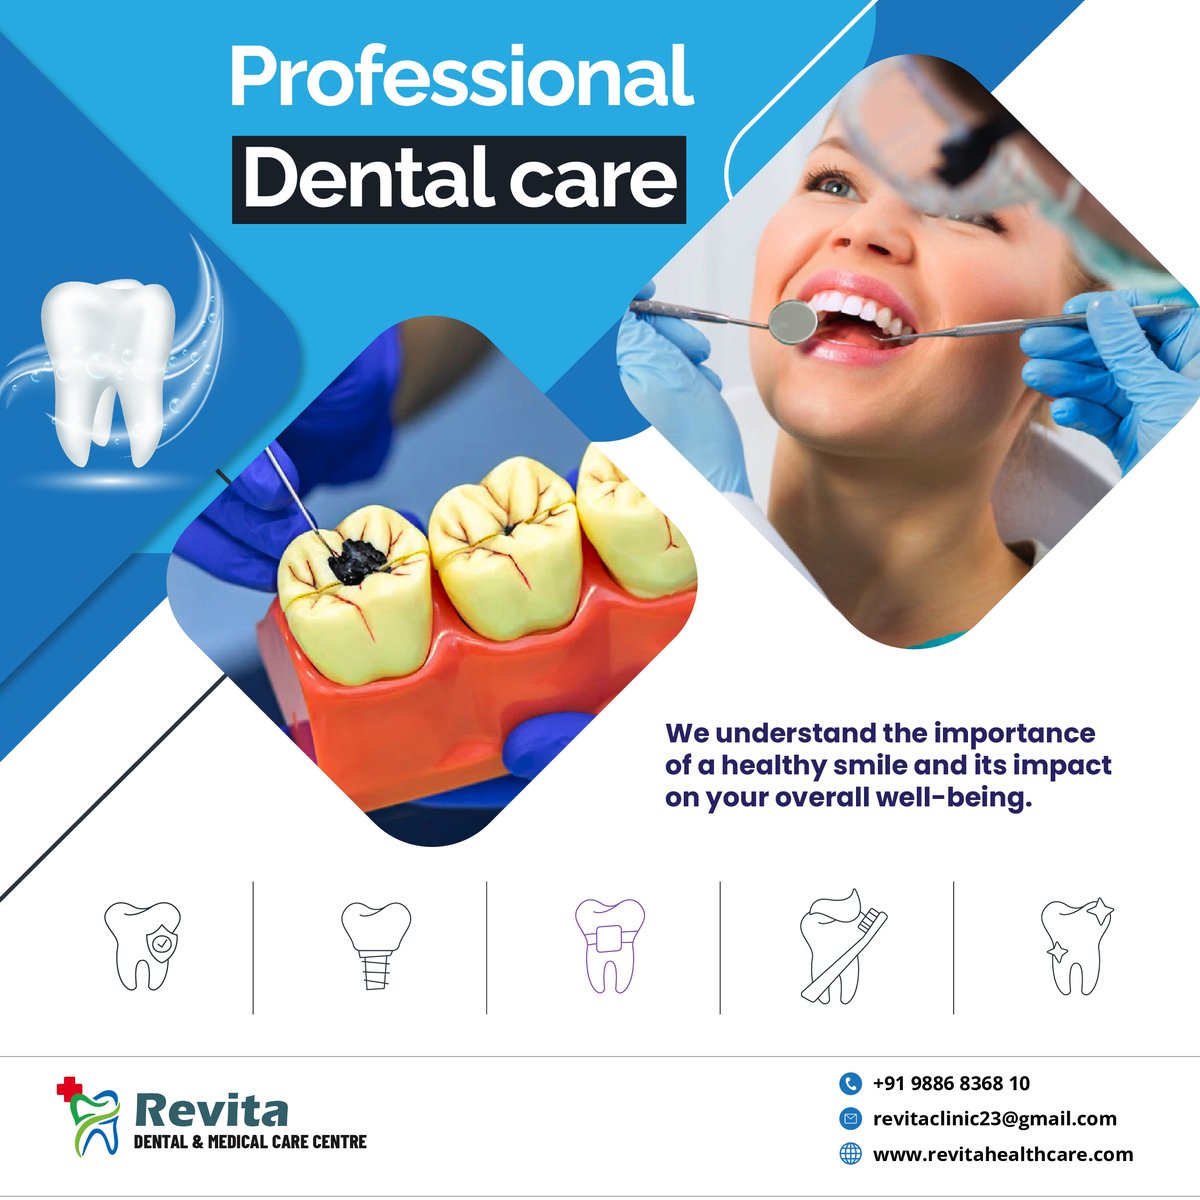 At Revita Dental Clinic,  we specialize in gentle and compassionate dental care 
for children.

Call us to Book an Appointment: +91 98868 36810 Visit Our Website: revitahealthcare.com

#ToothAnatomy #DentalStructure #BangaloreDentist #BangaloreDentalClinic